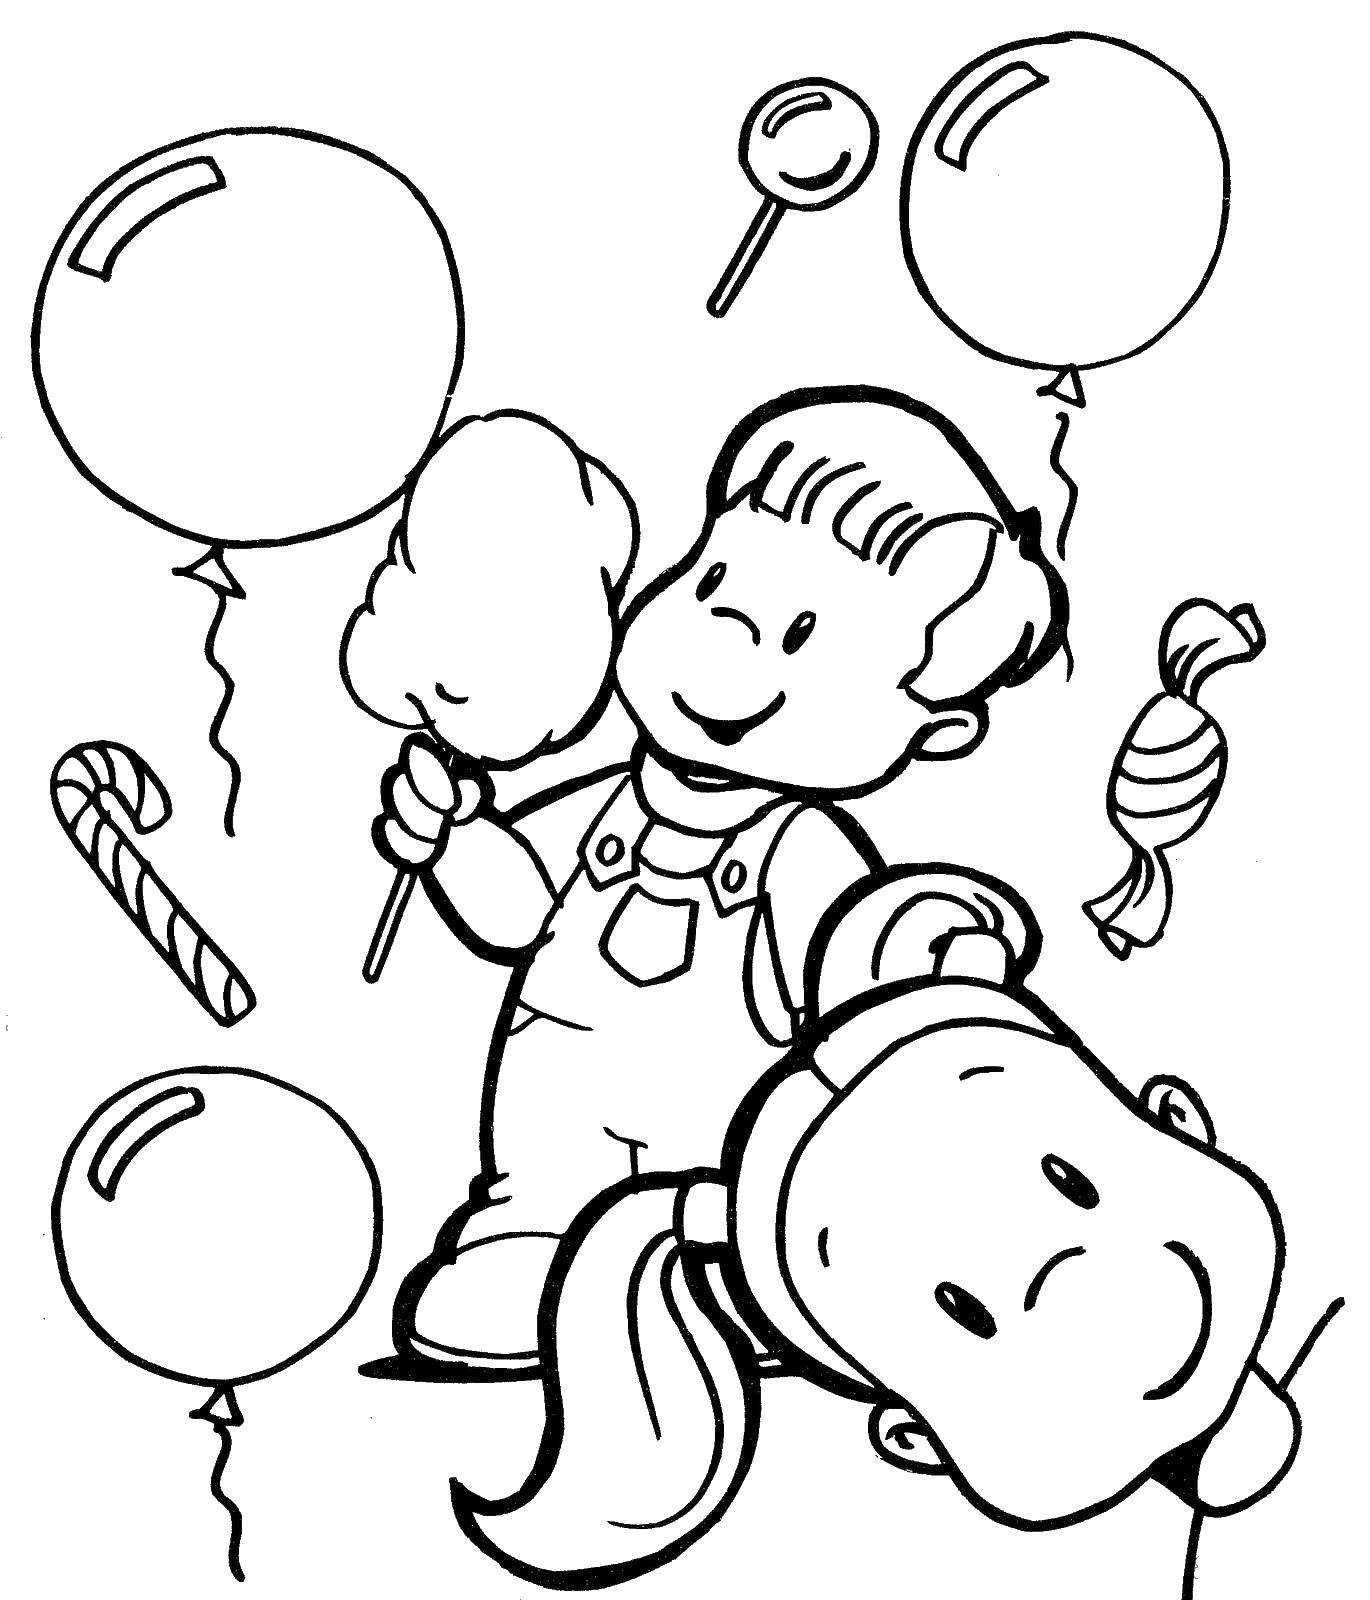 Coloring Children and sweets. Category sweets. Tags:  sweets, children, kids.